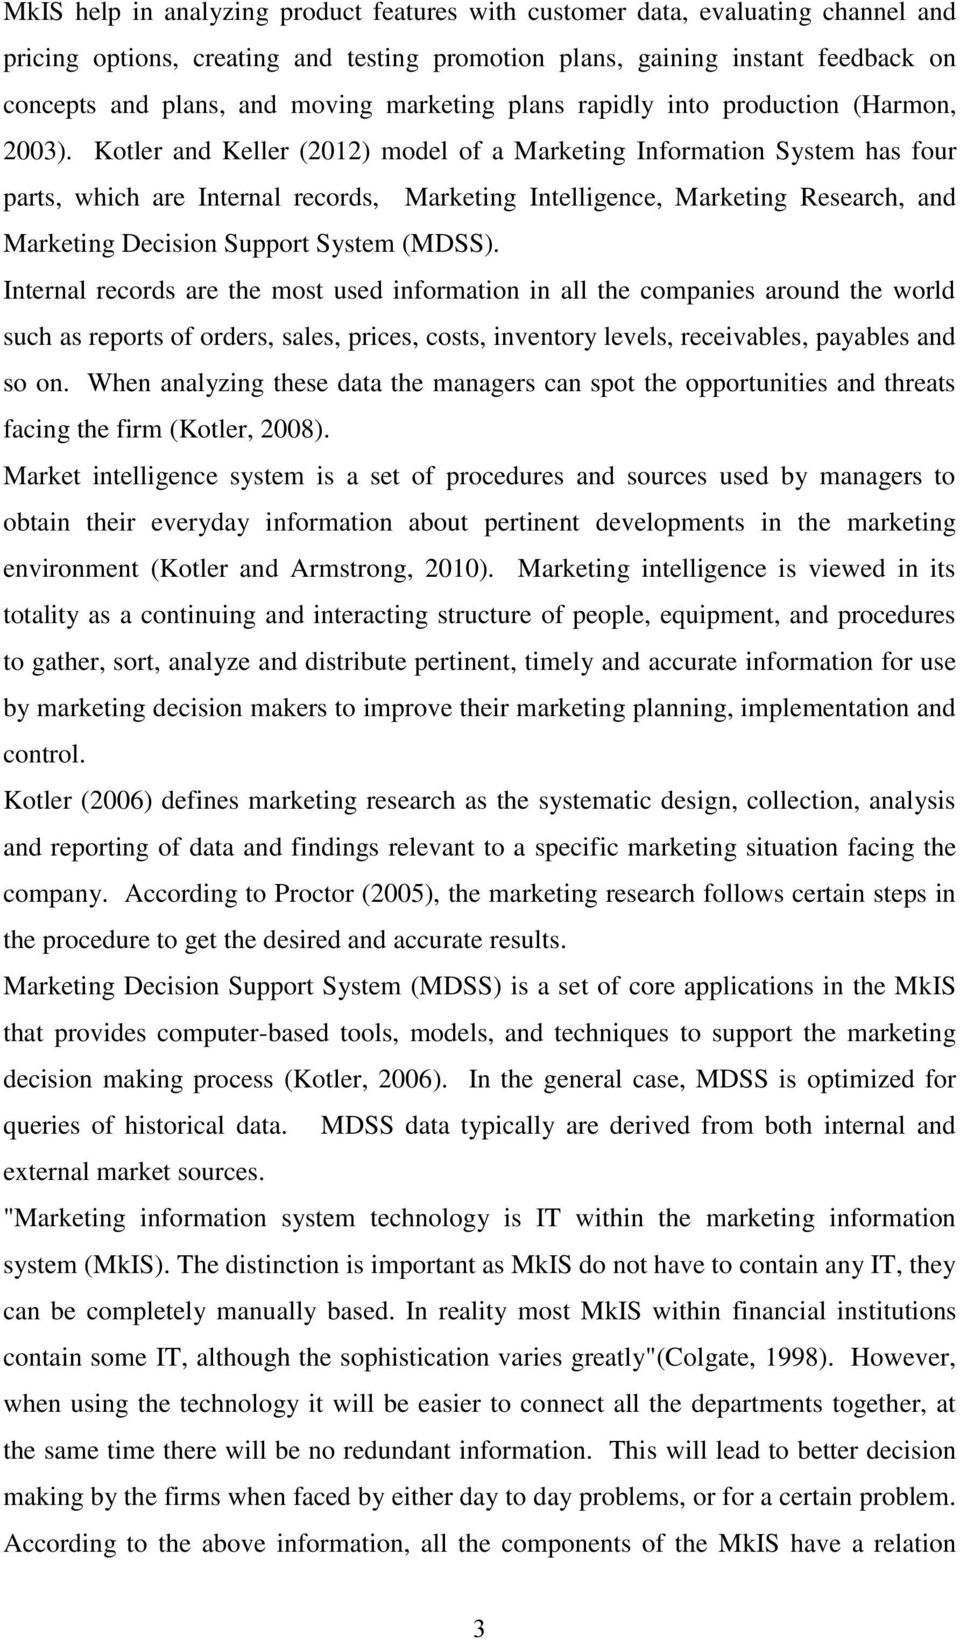 Kotler and Keller (2012) model of a Marketing Information System has four parts, which are Internal records, Marketing Intelligence, Marketing Research, and Marketing Decision Support System (MDSS).